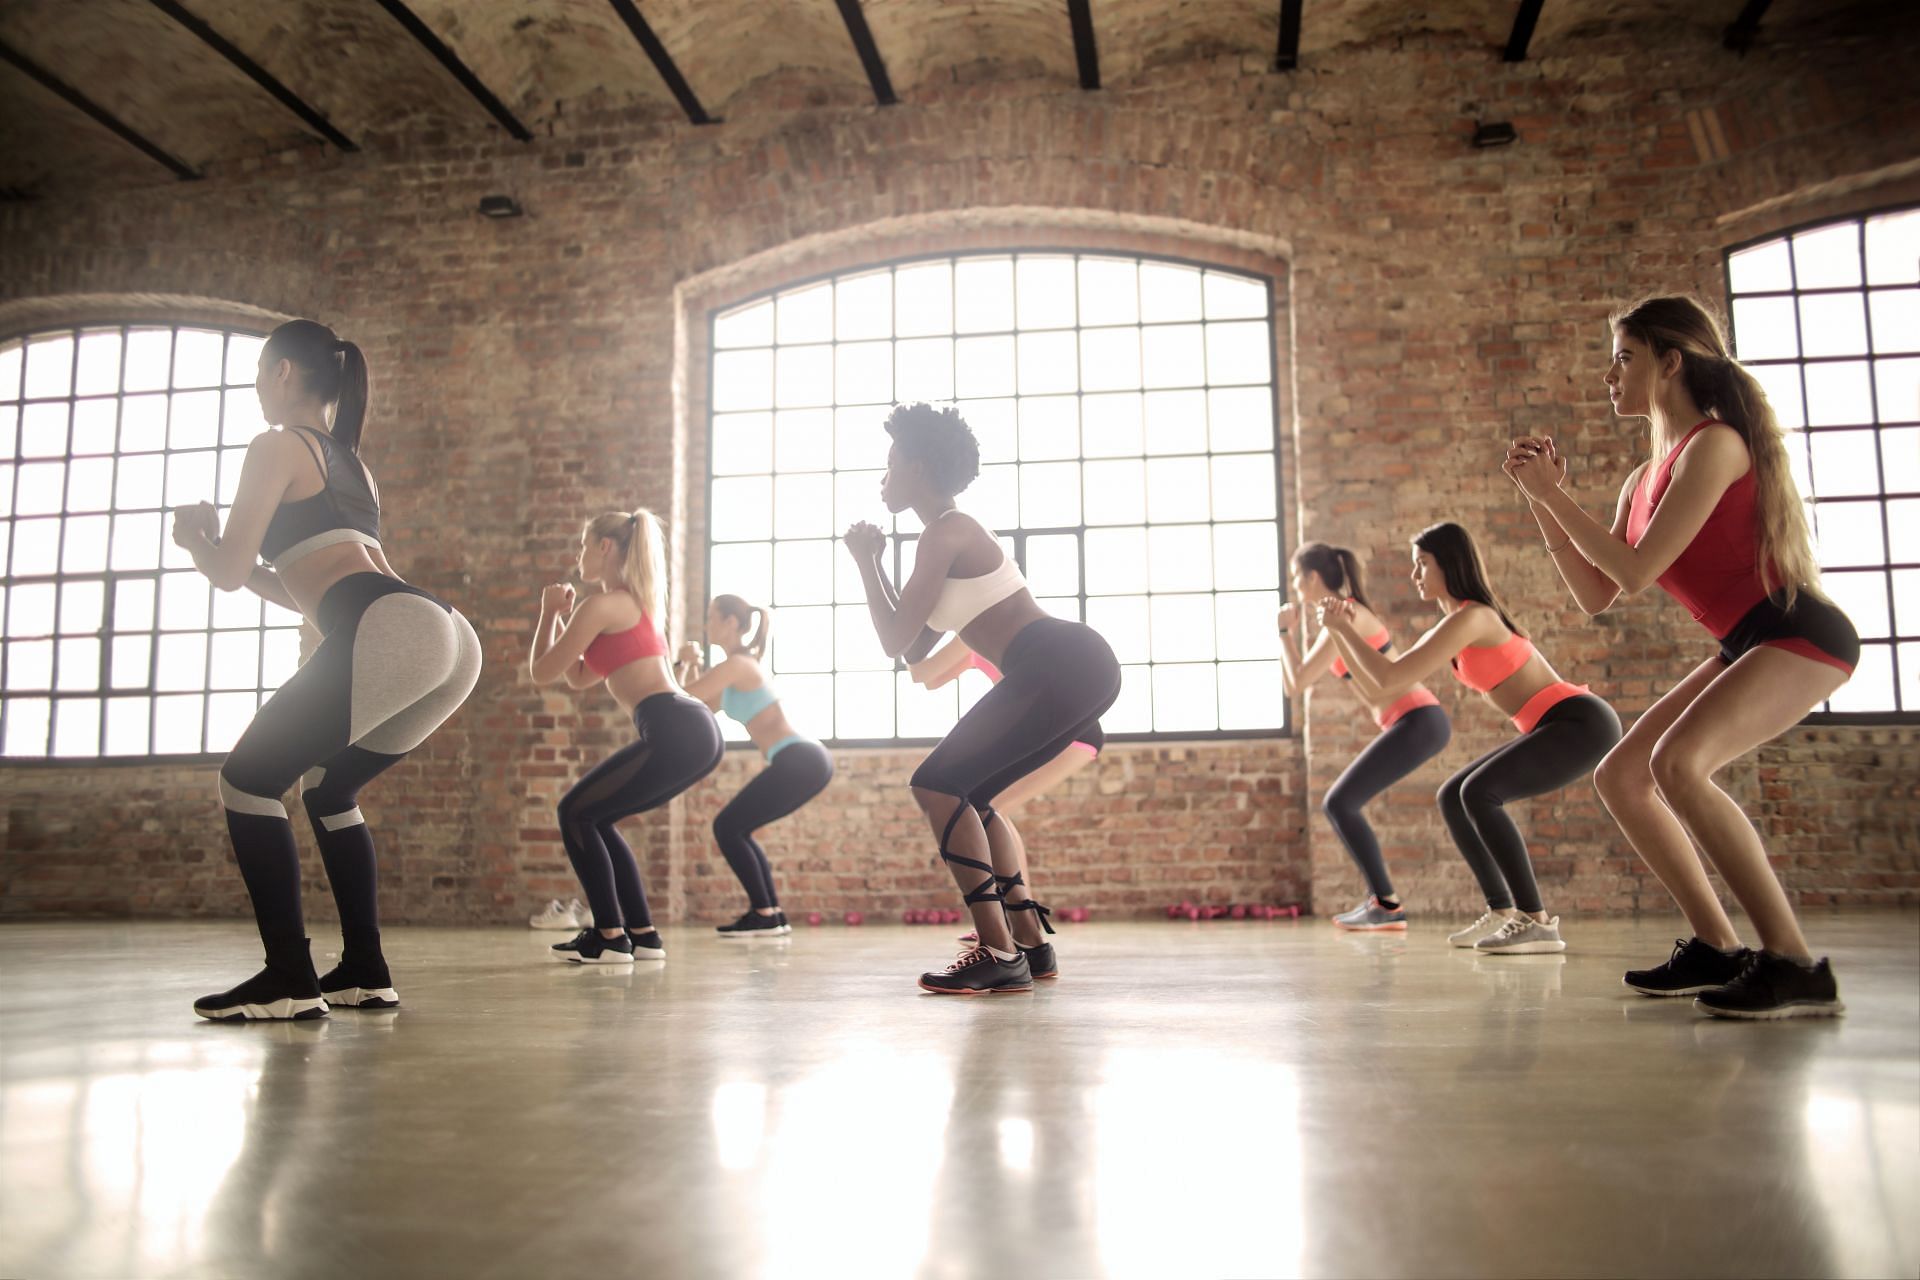 Dance workouts along with exercises like squats can be part of a complete fitness routine (Image via Pexels @Andrea Piacquadio)